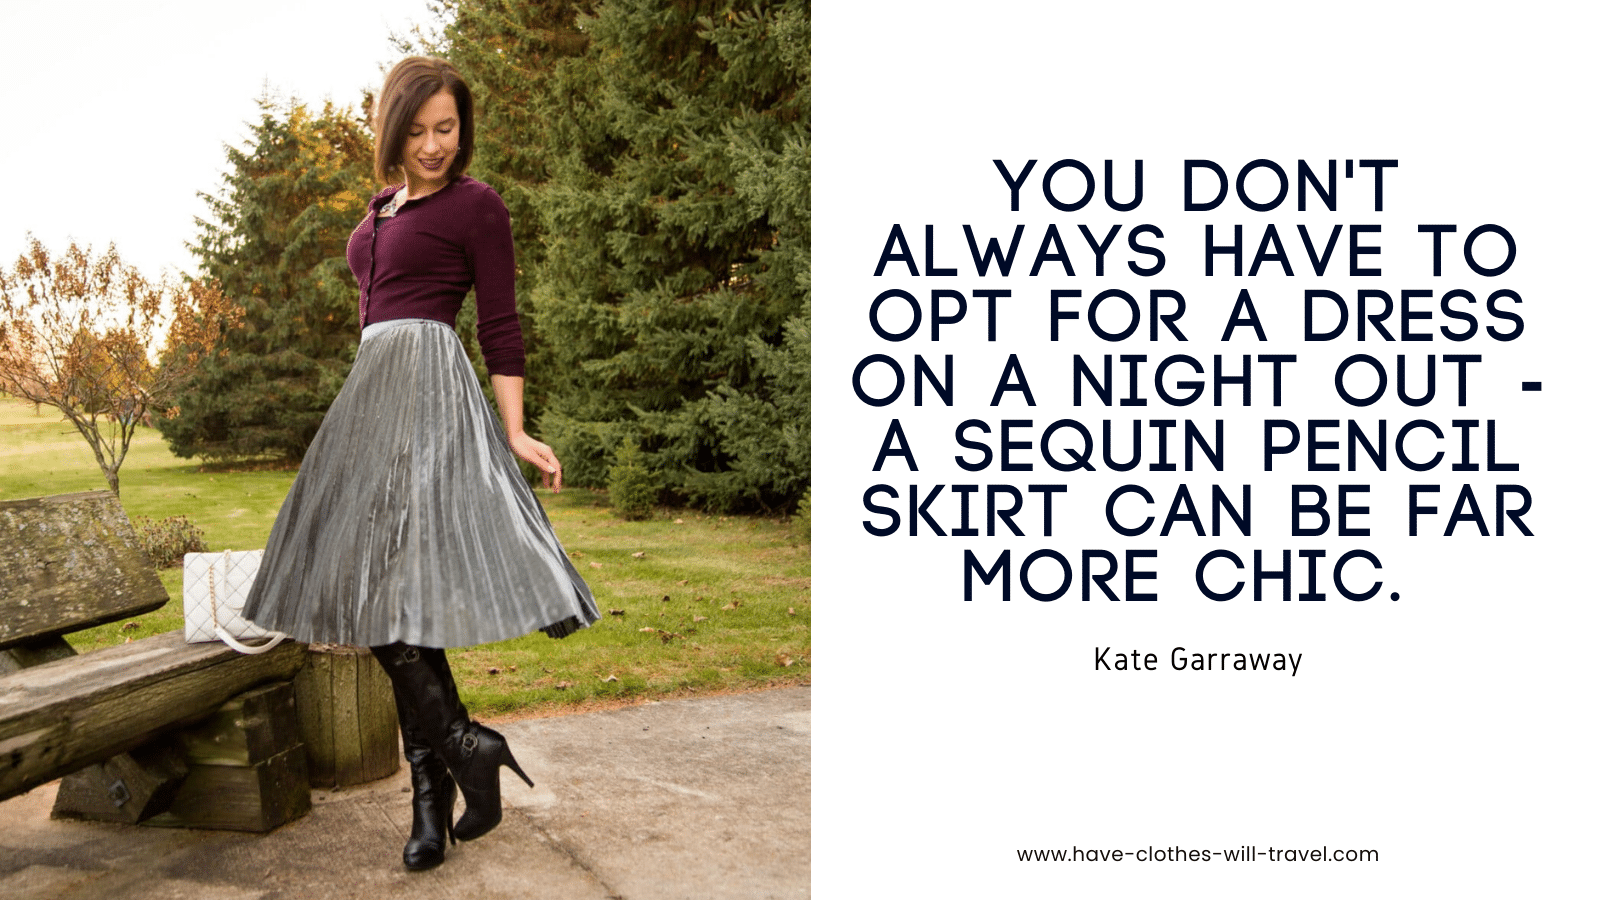 100. You don't always have to opt for a dress on a night out - a sequin pencil skirt can be far more chic. - Kate Garraway